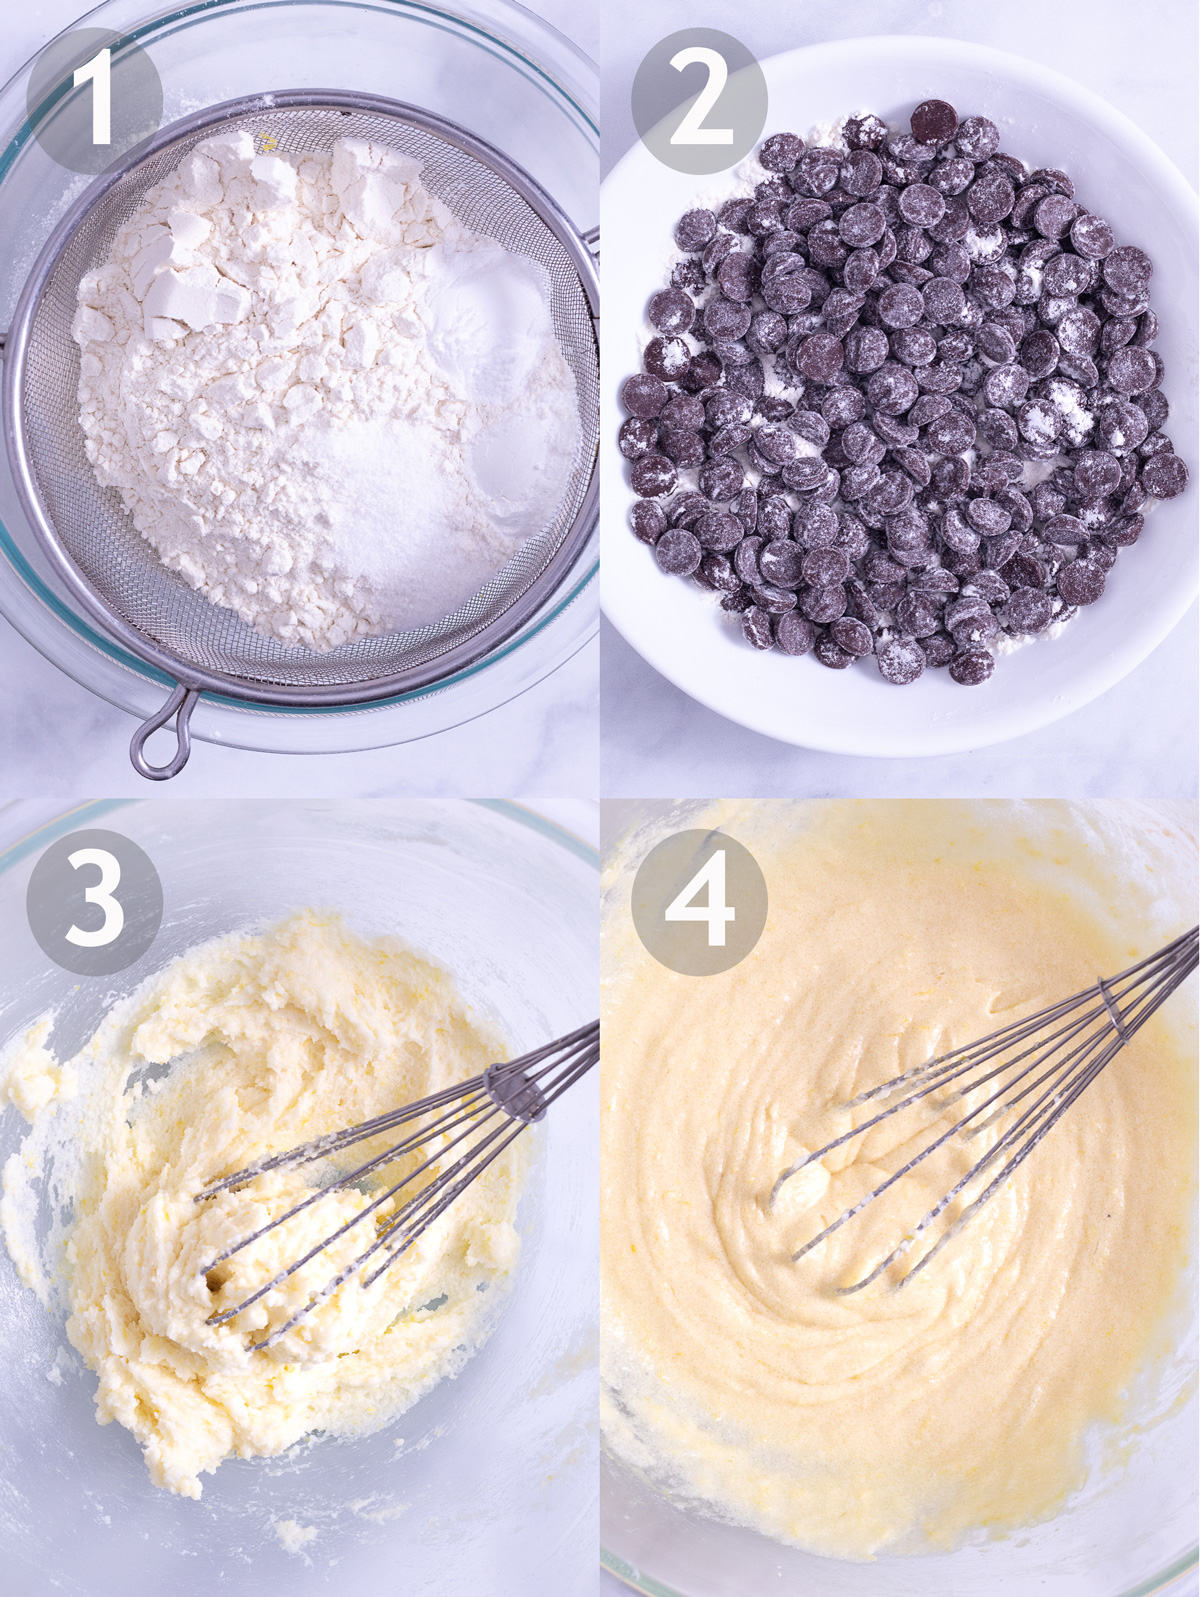 First 4 steps to make chocolate chip muffins including sifting dry ingredients, coating chocolate chips in flour, and whisking sugar, butter and eggs.